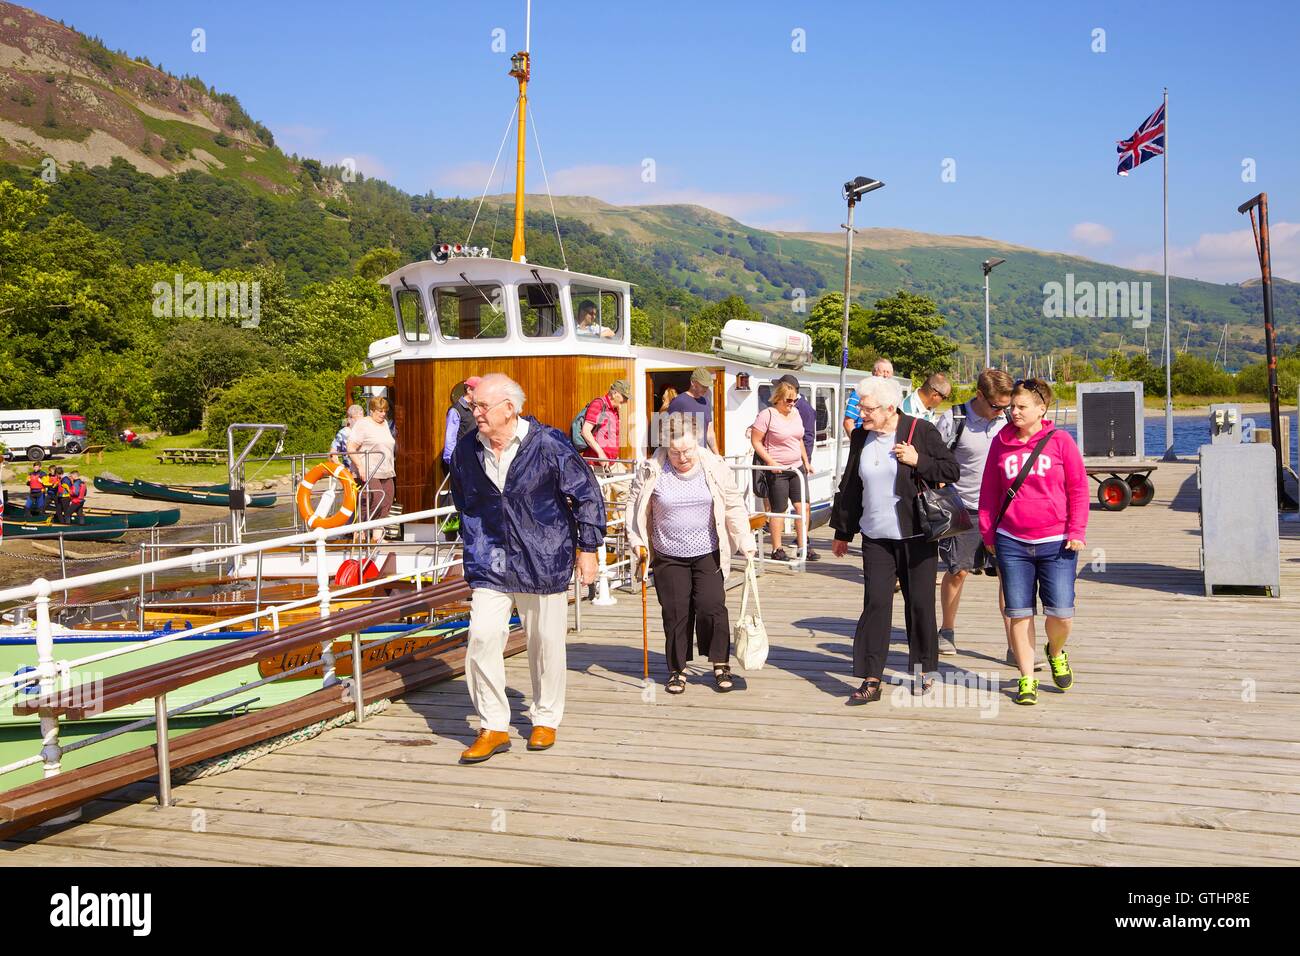 Tourists disembarking a cruise from Ullswater Steamer. Glenridding Pier, Ullswater, Penrith, The Lake District National Park, UK Stock Photo